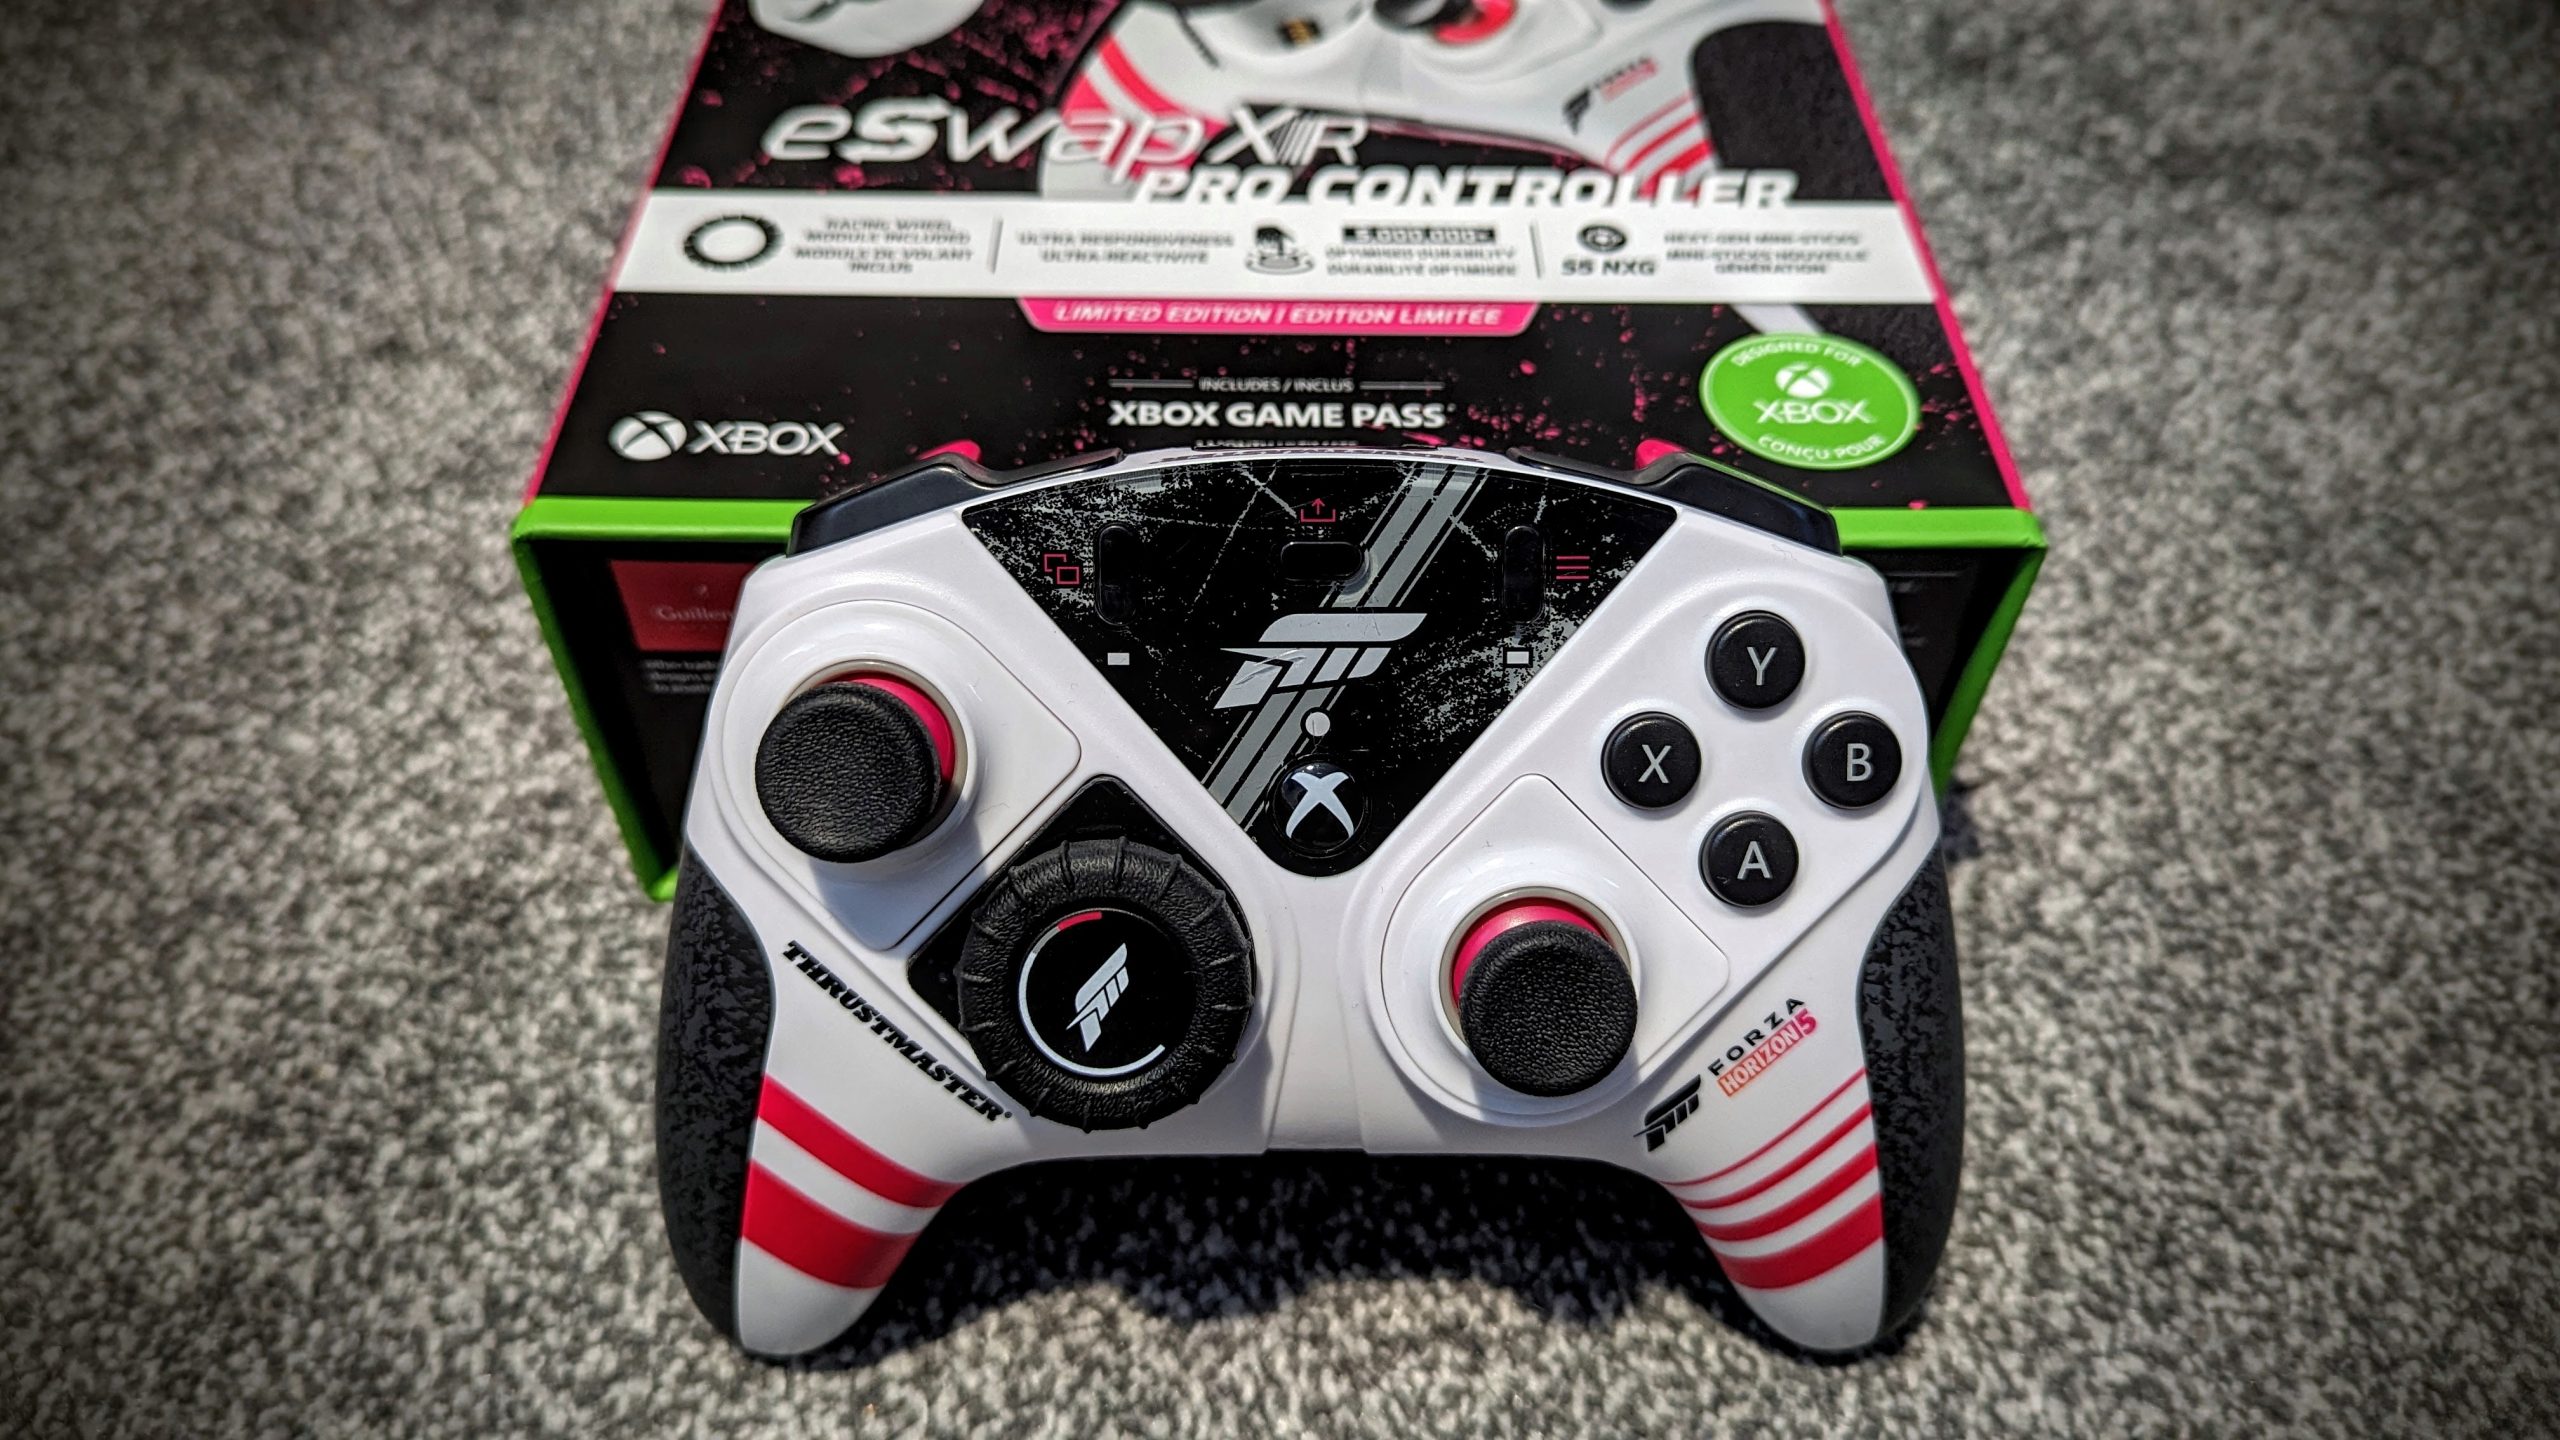 Thrustmaster has added a mini steering wheel to a gamepad